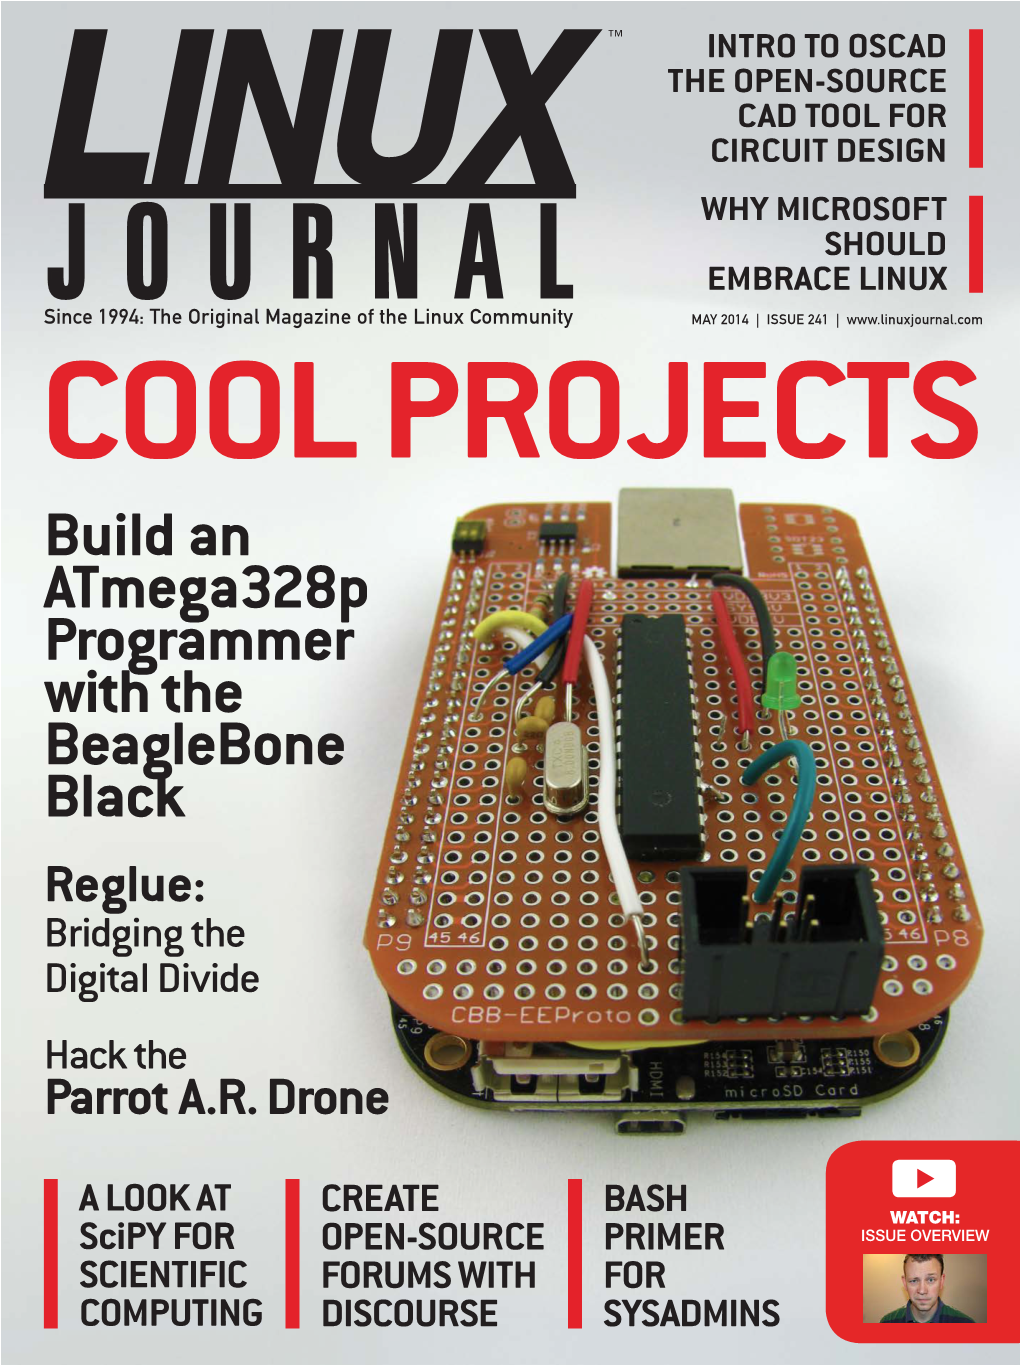 LINUX JOURNAL (ISSN 1075-3583) Is Published Monthly by Belltown Media, Inc., 2121 Sage Road, Ste